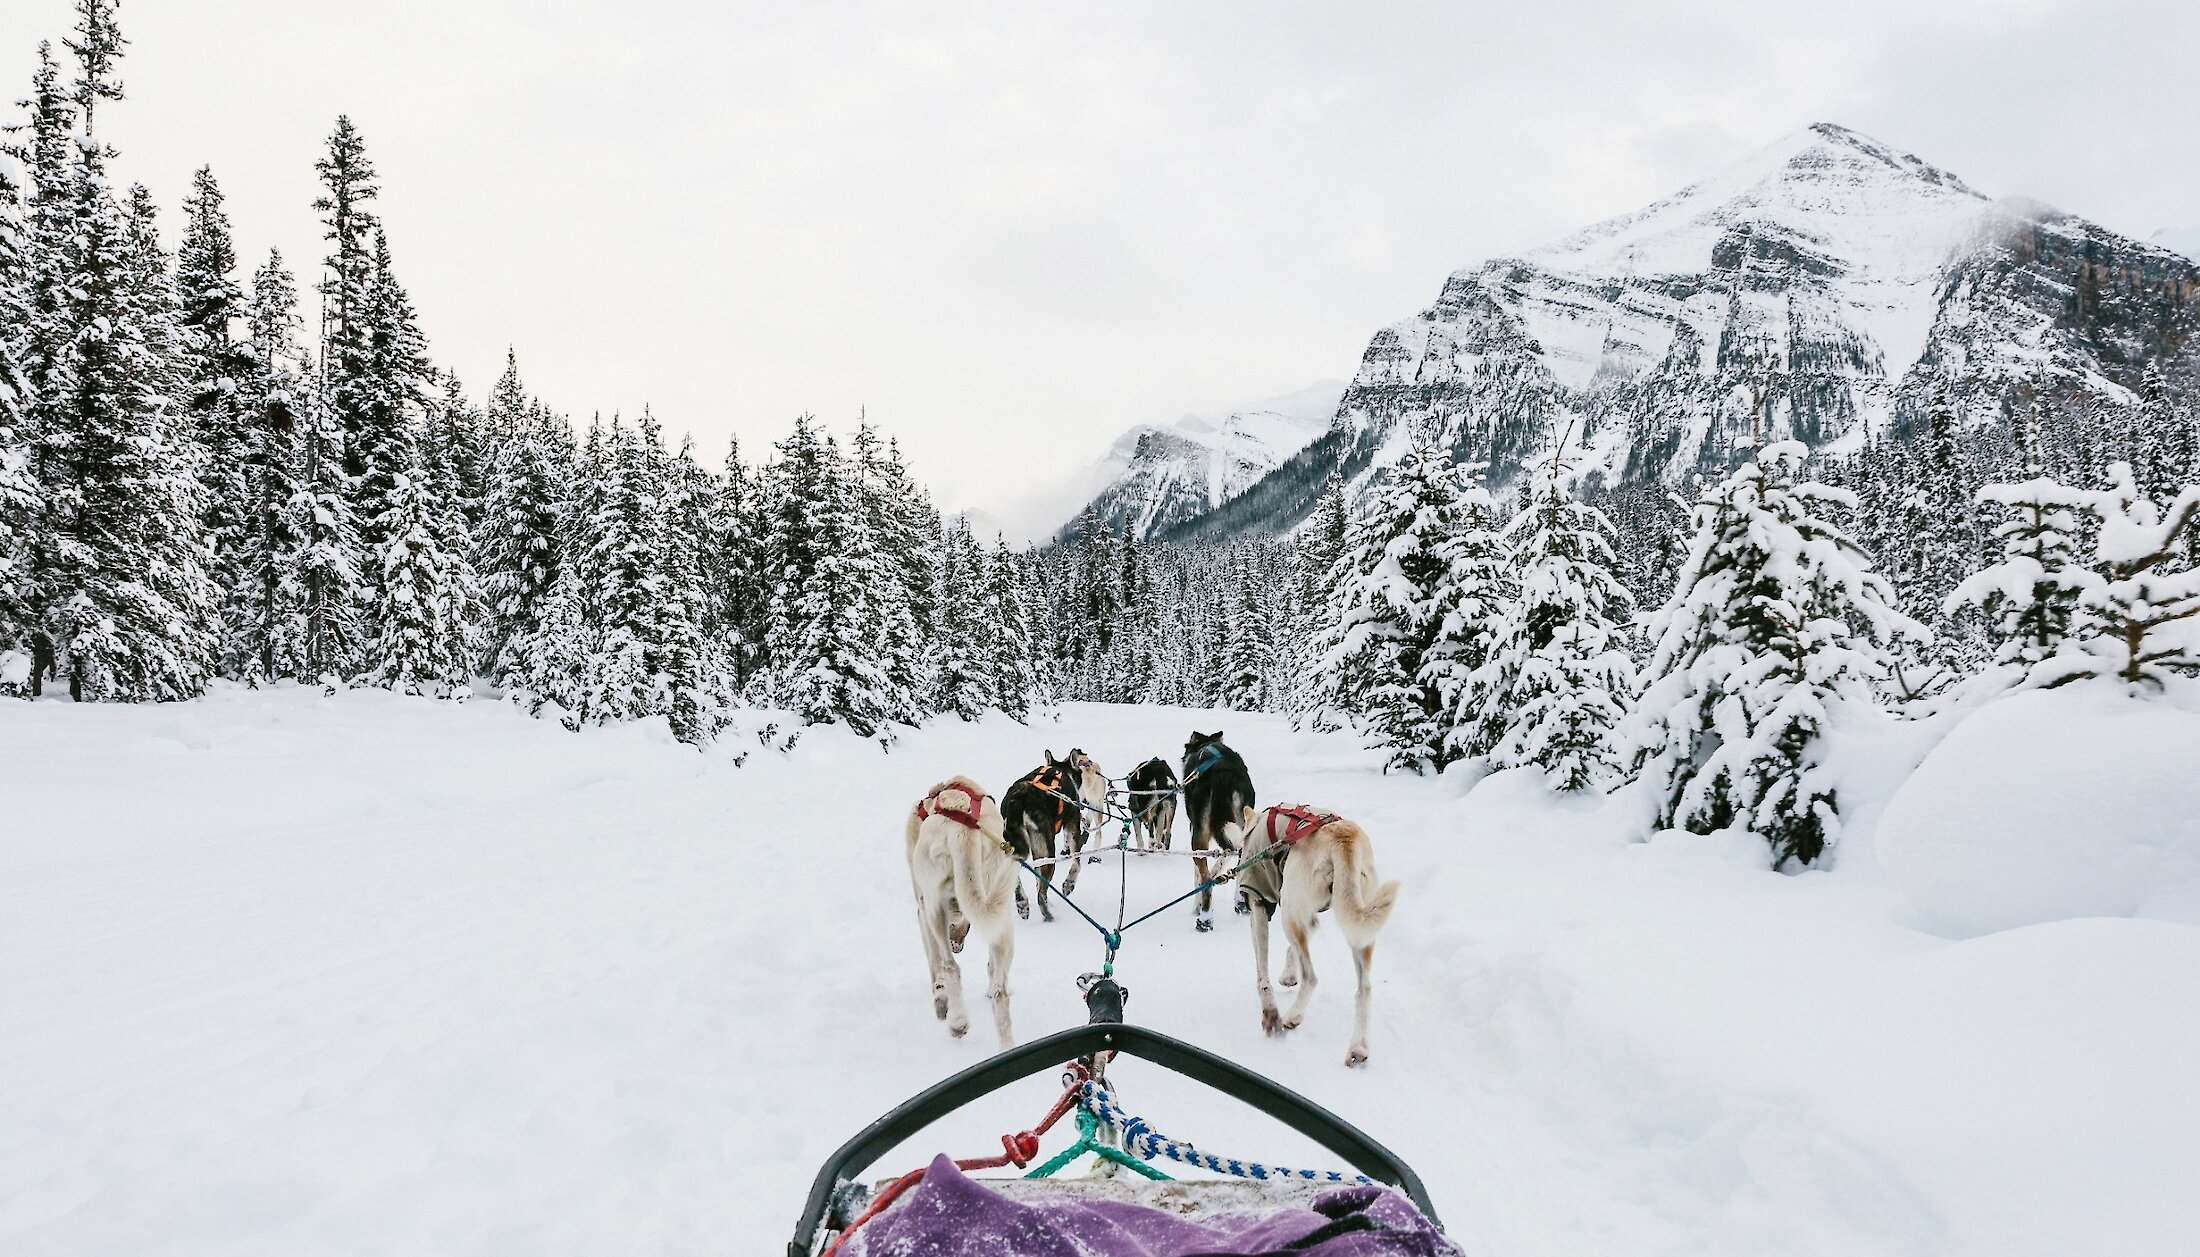 Dogsledding on the wintery trails